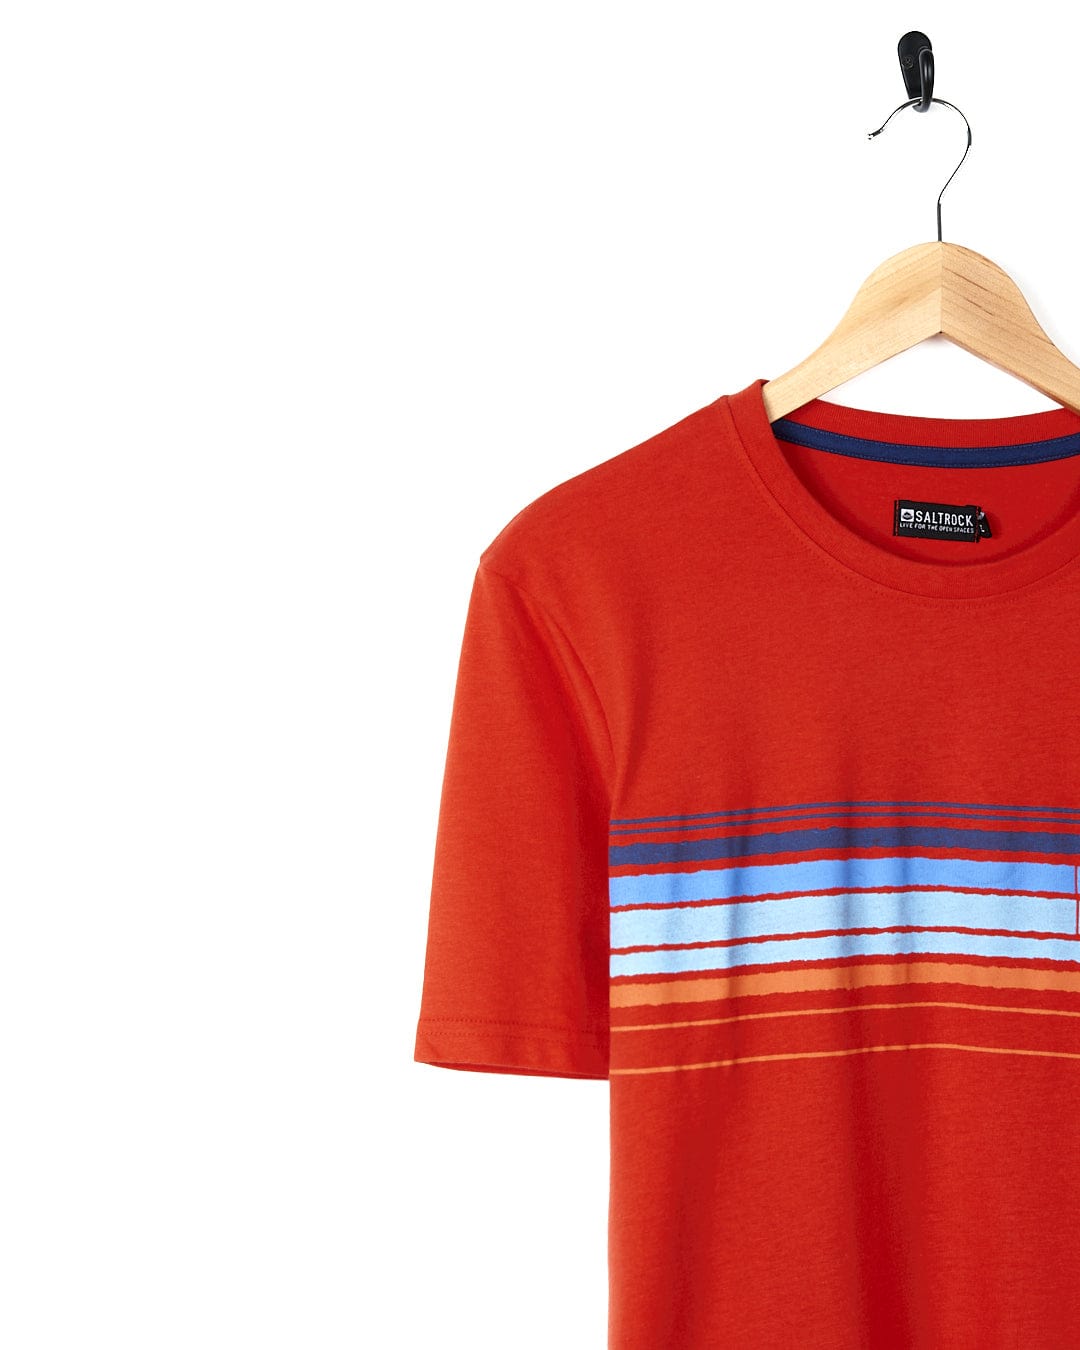 A Saltrock Retro Carve - Mens Short Sleeve T-Shirt - Red with retro stripe design hanging on a hanger.